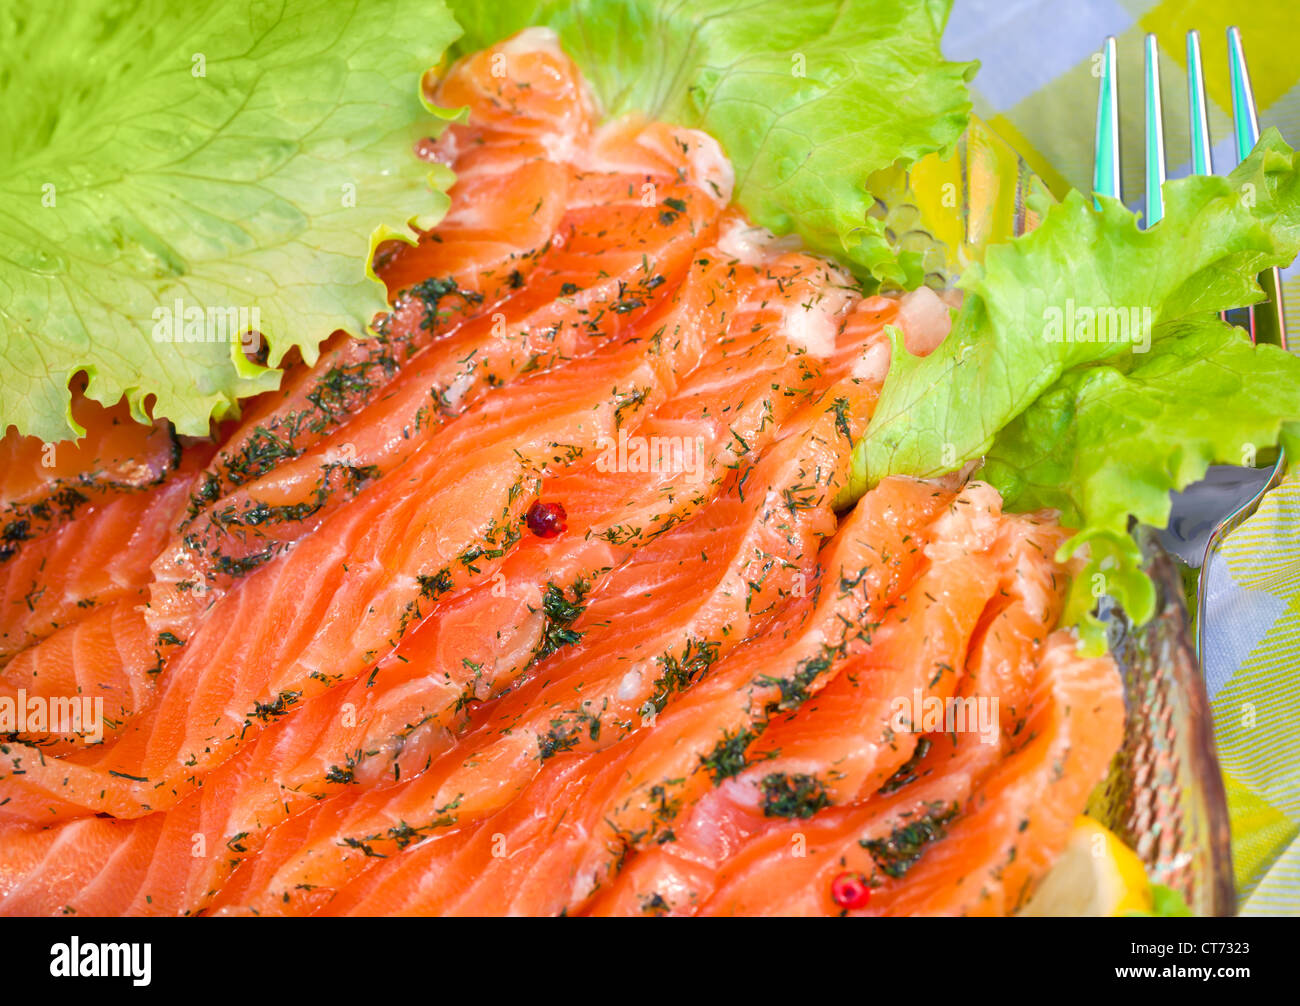 Close-up photo of smoked salmon slices served with salad and dill Stock Photo